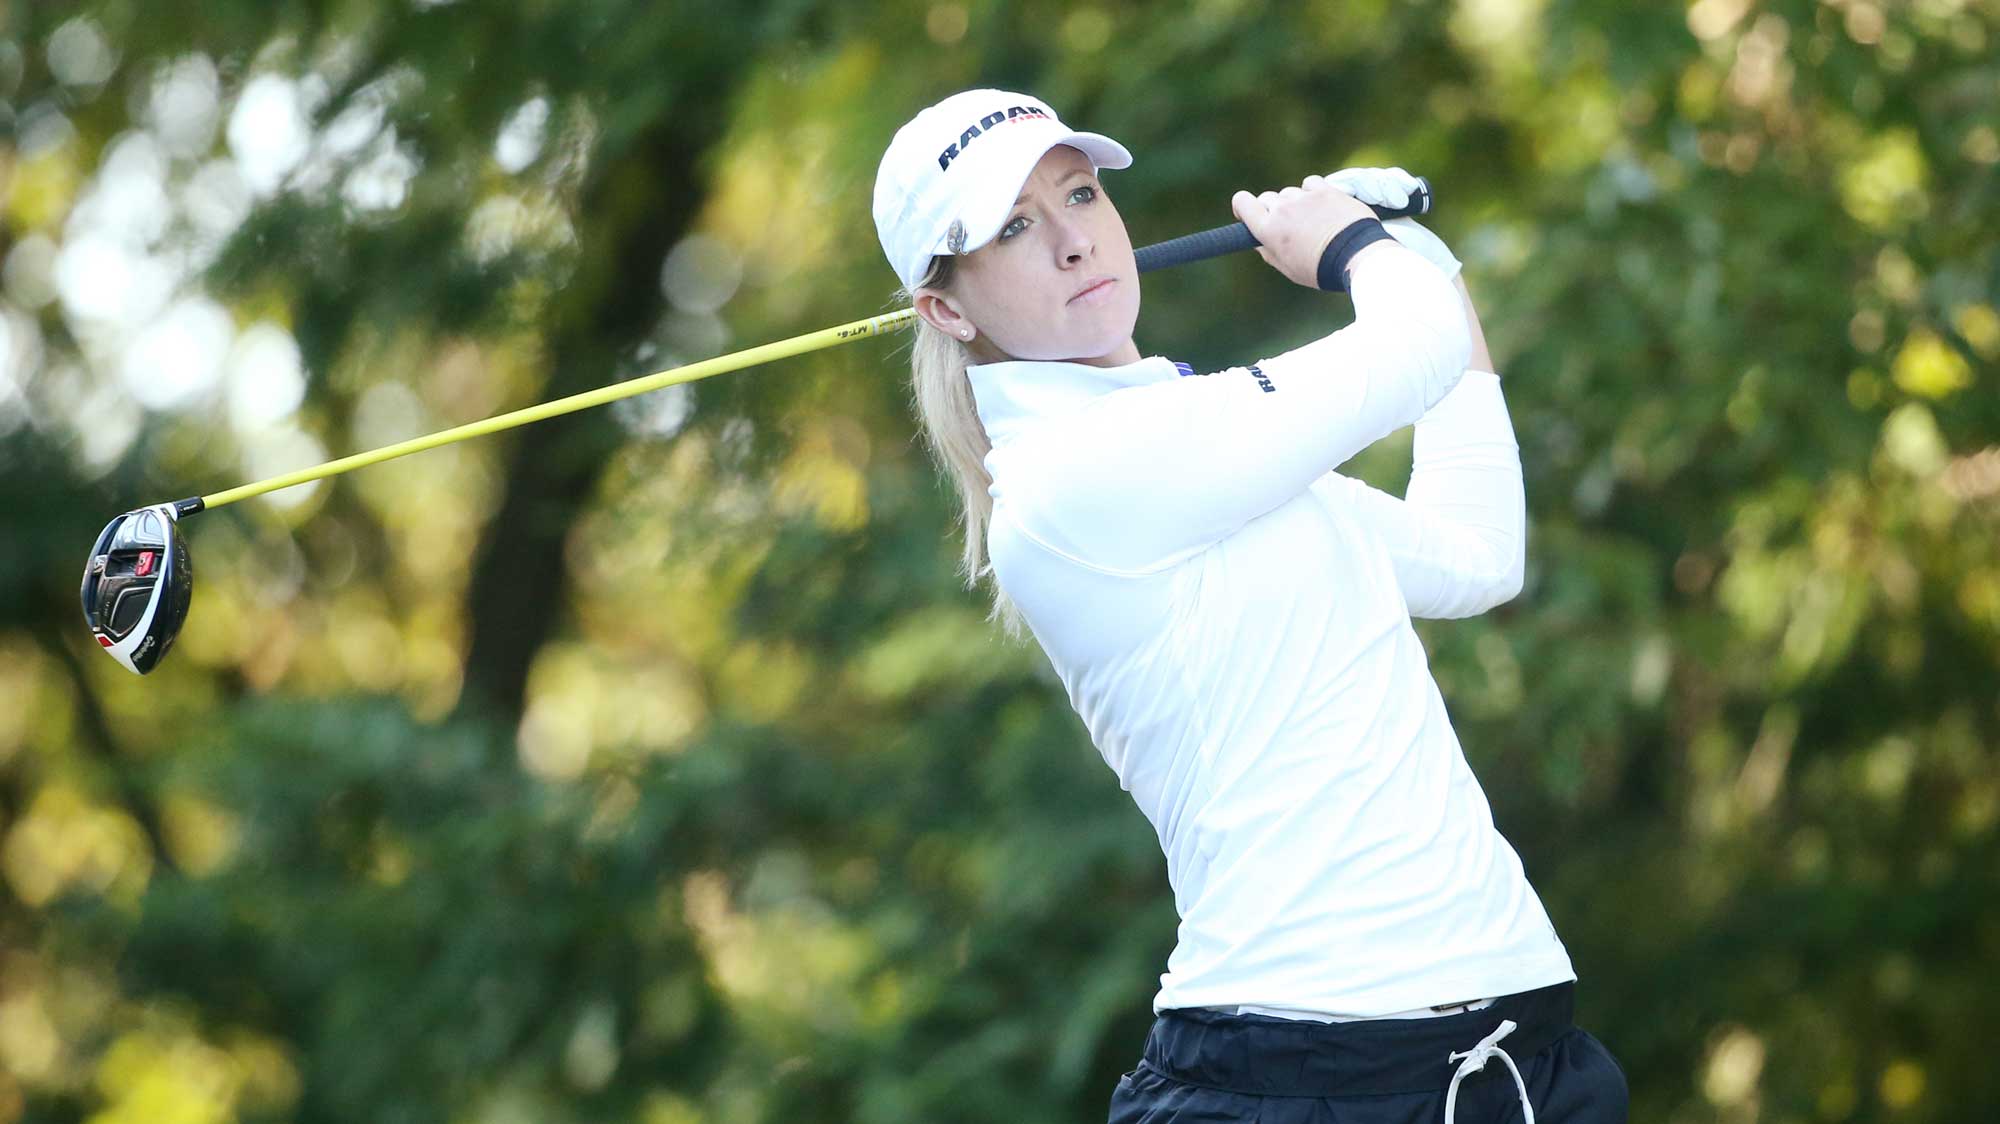 Jodi Ewart Shadoff of Great Britain hits her tee shot on the 2nd hole during the first round of the TOTO Japan Classic